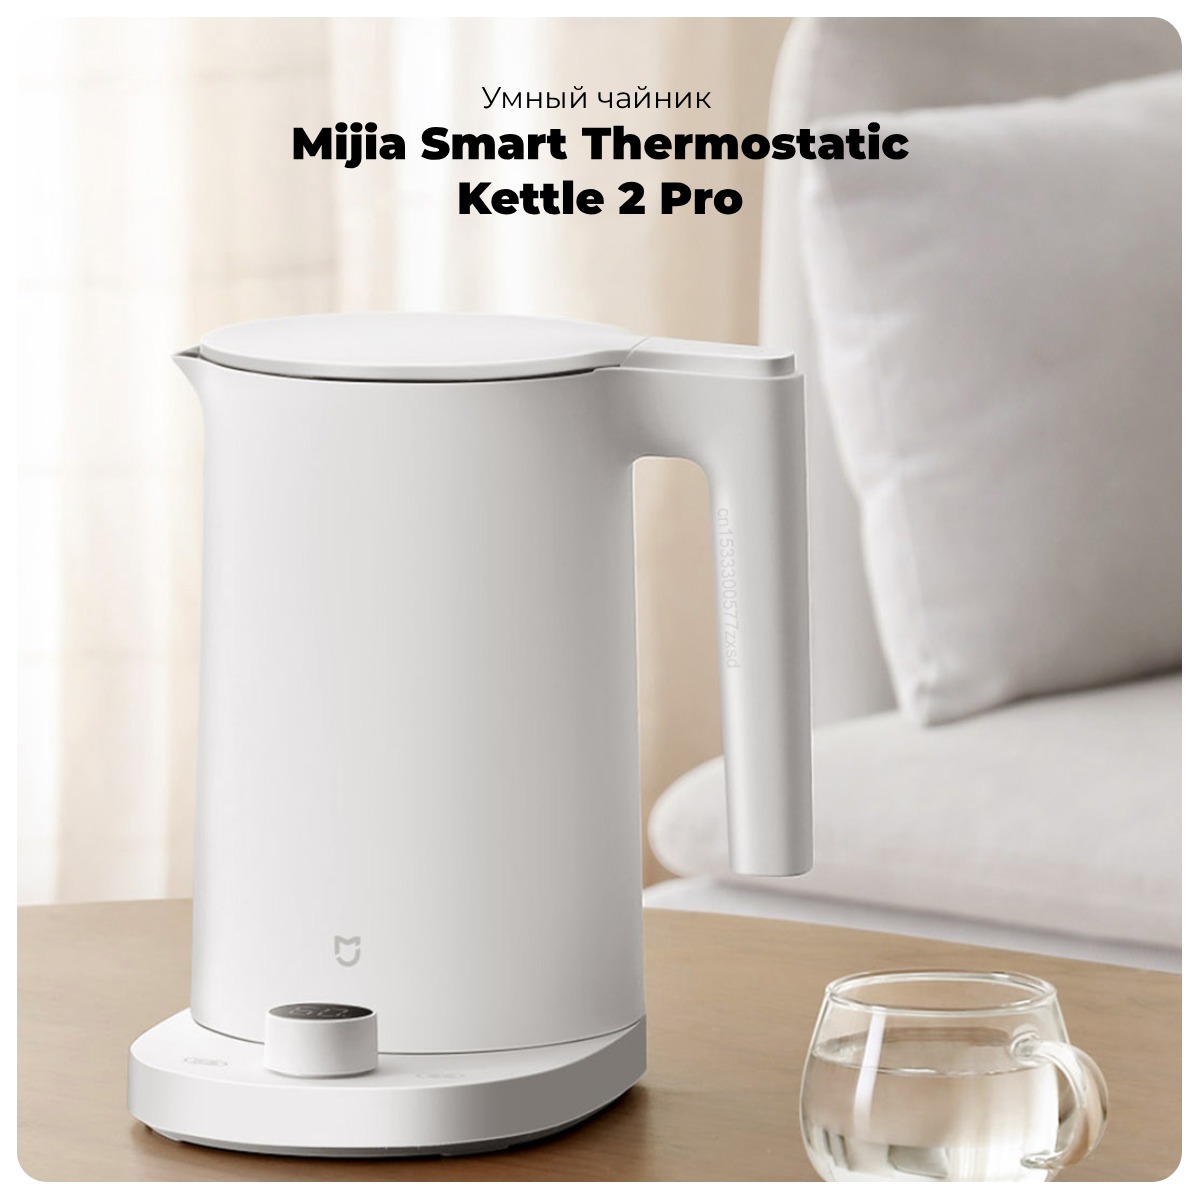 Mijia-Smart-Thermostatic-Kettle-2-Pro-01